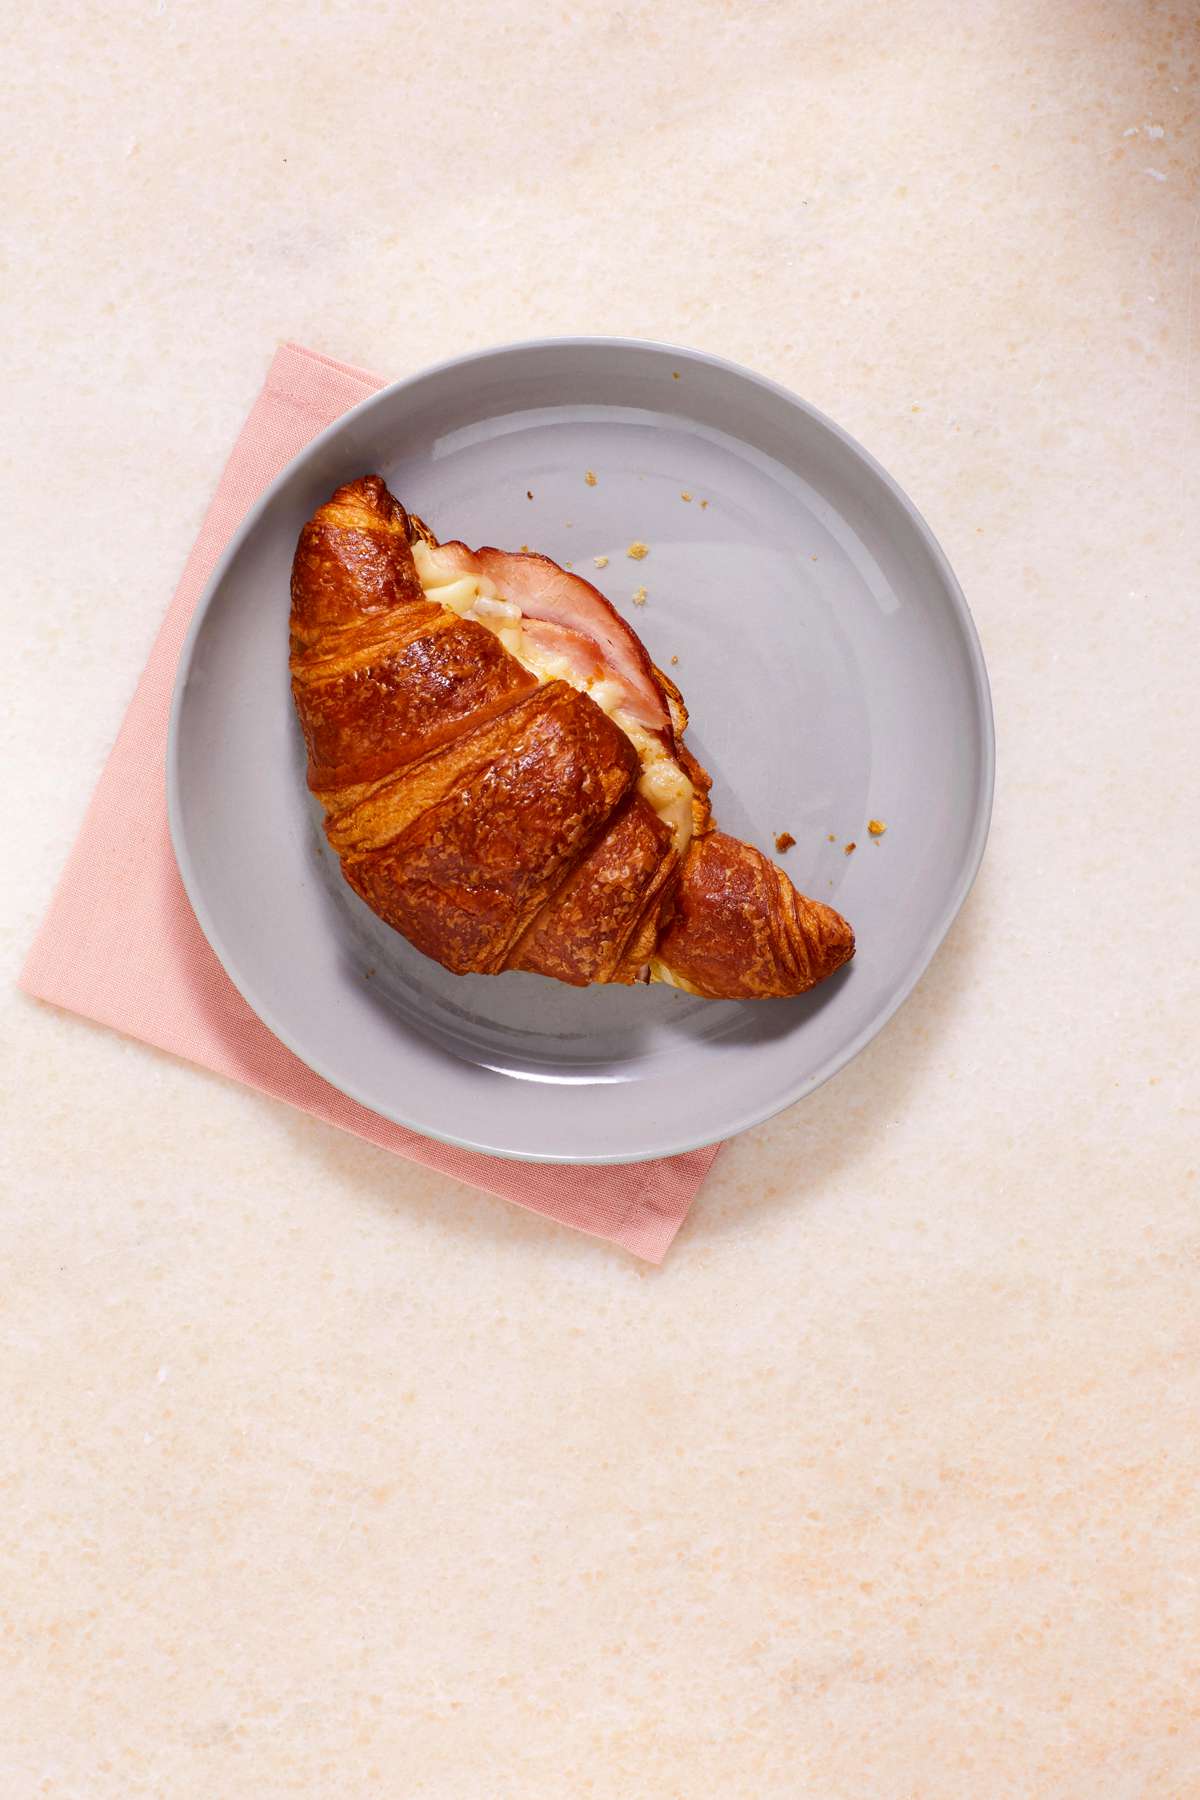 twice-baked ham croissant served on a gray plate